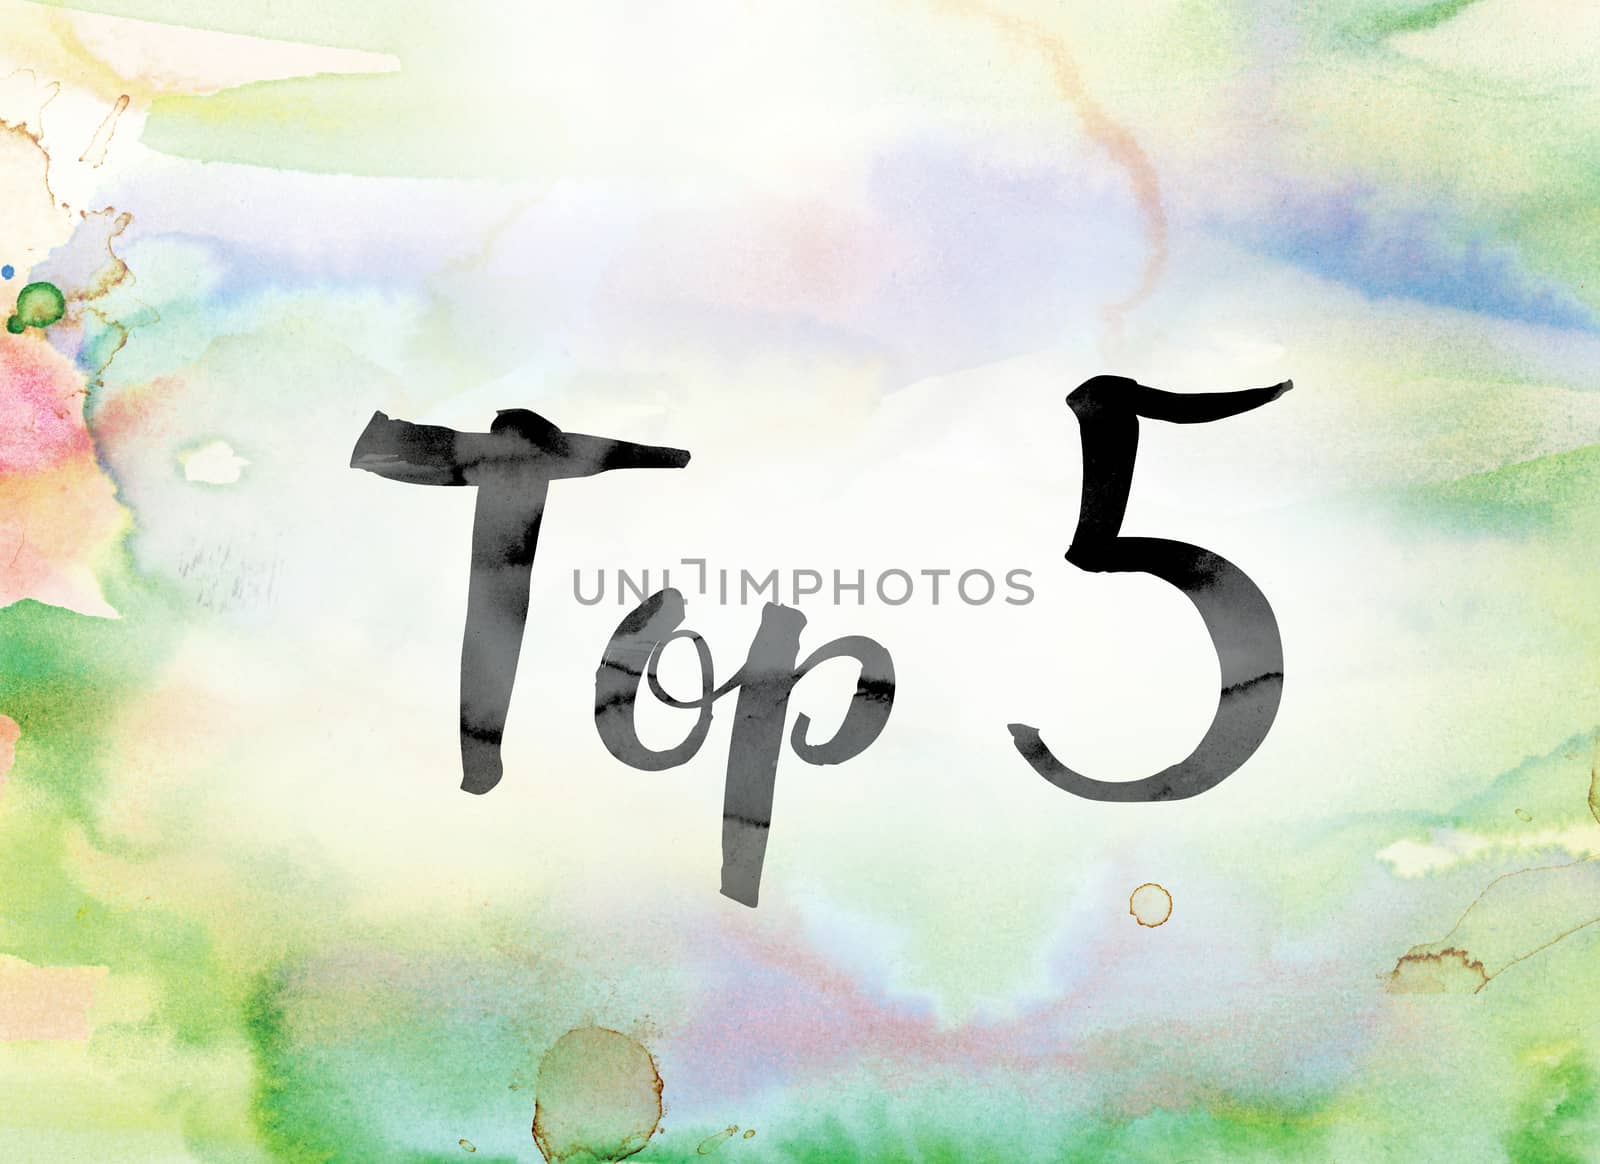 The word "Top 5" painted in black ink over a colorful watercolor washed background concept and theme.